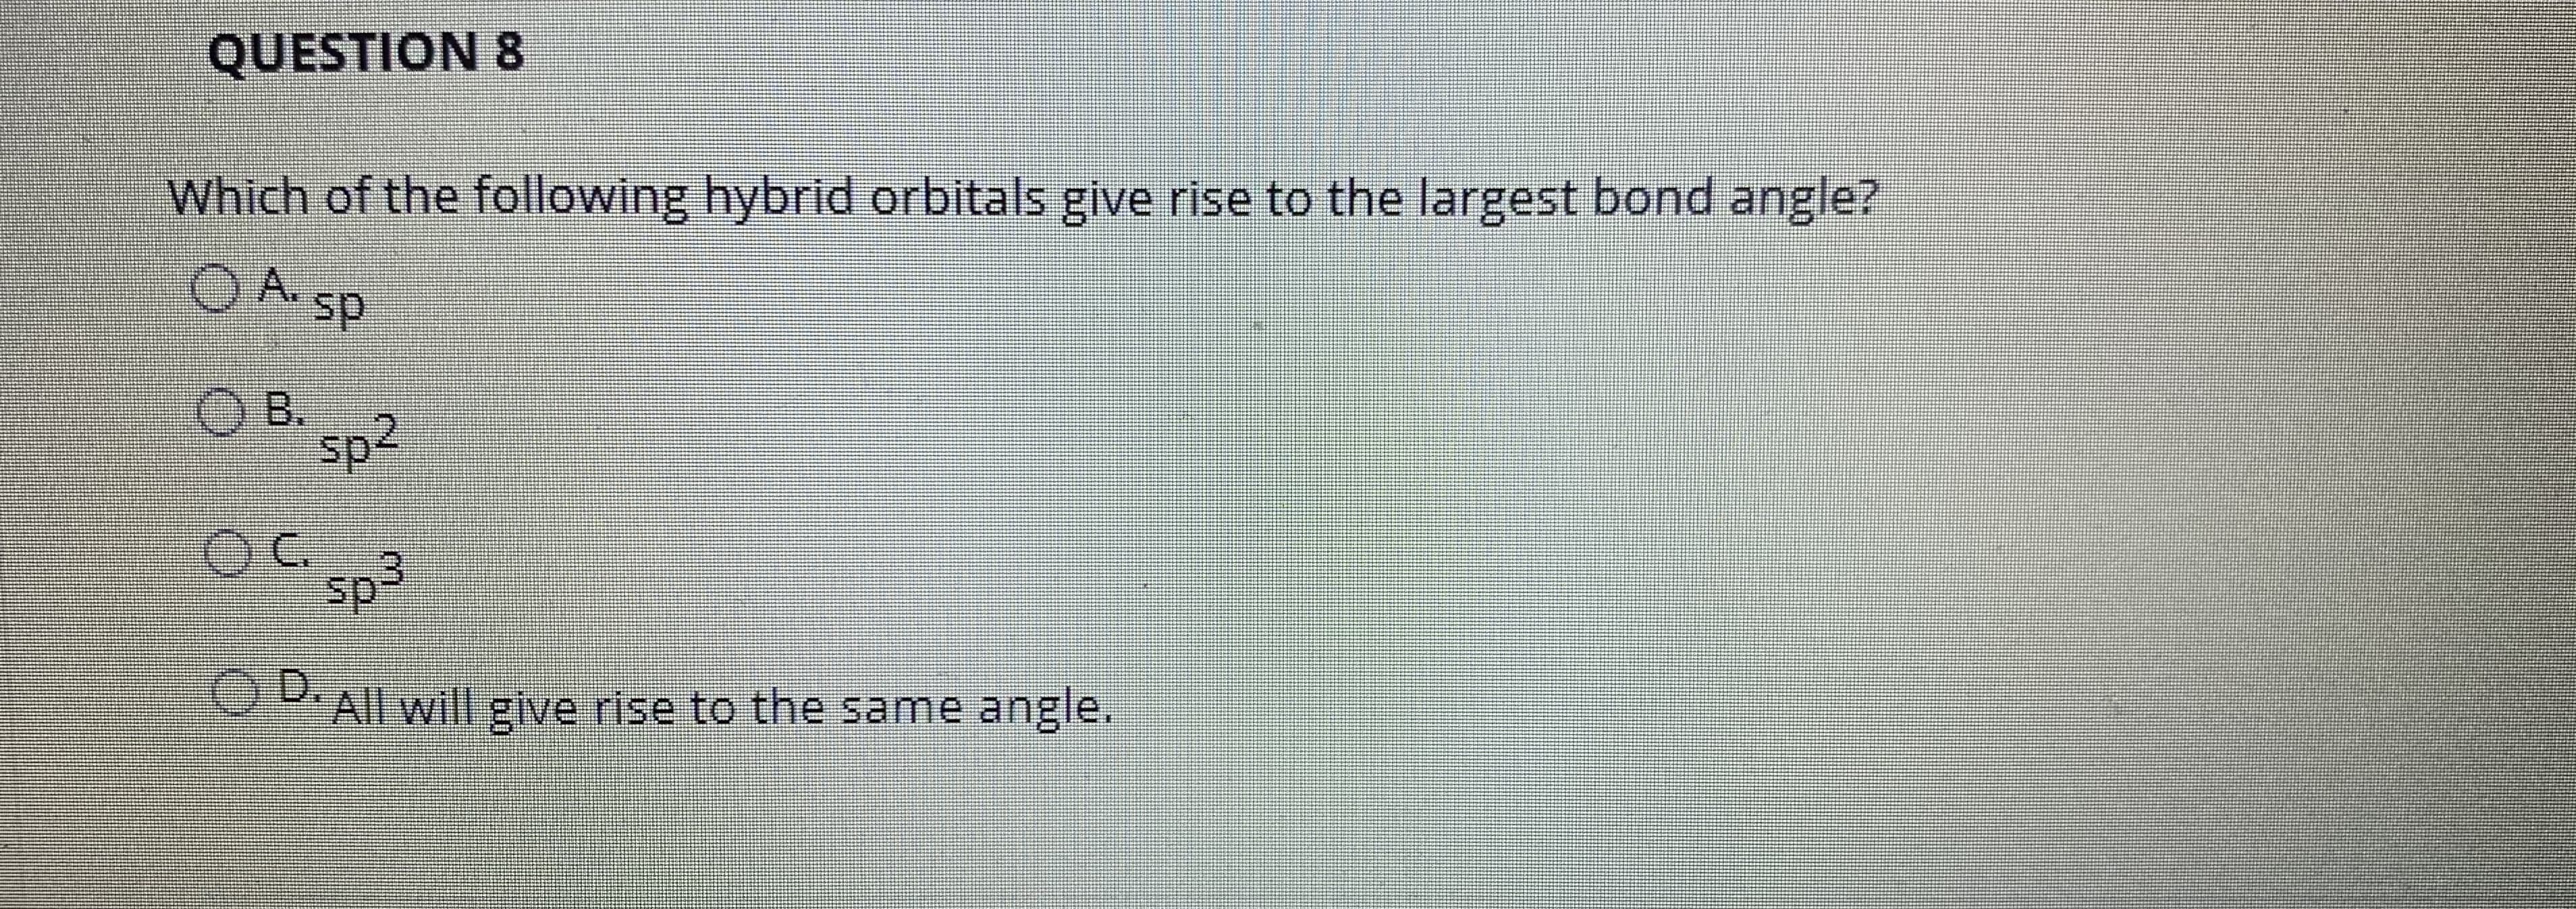 Which of the following hybrid orbitals give rise to the largest bond angle?
